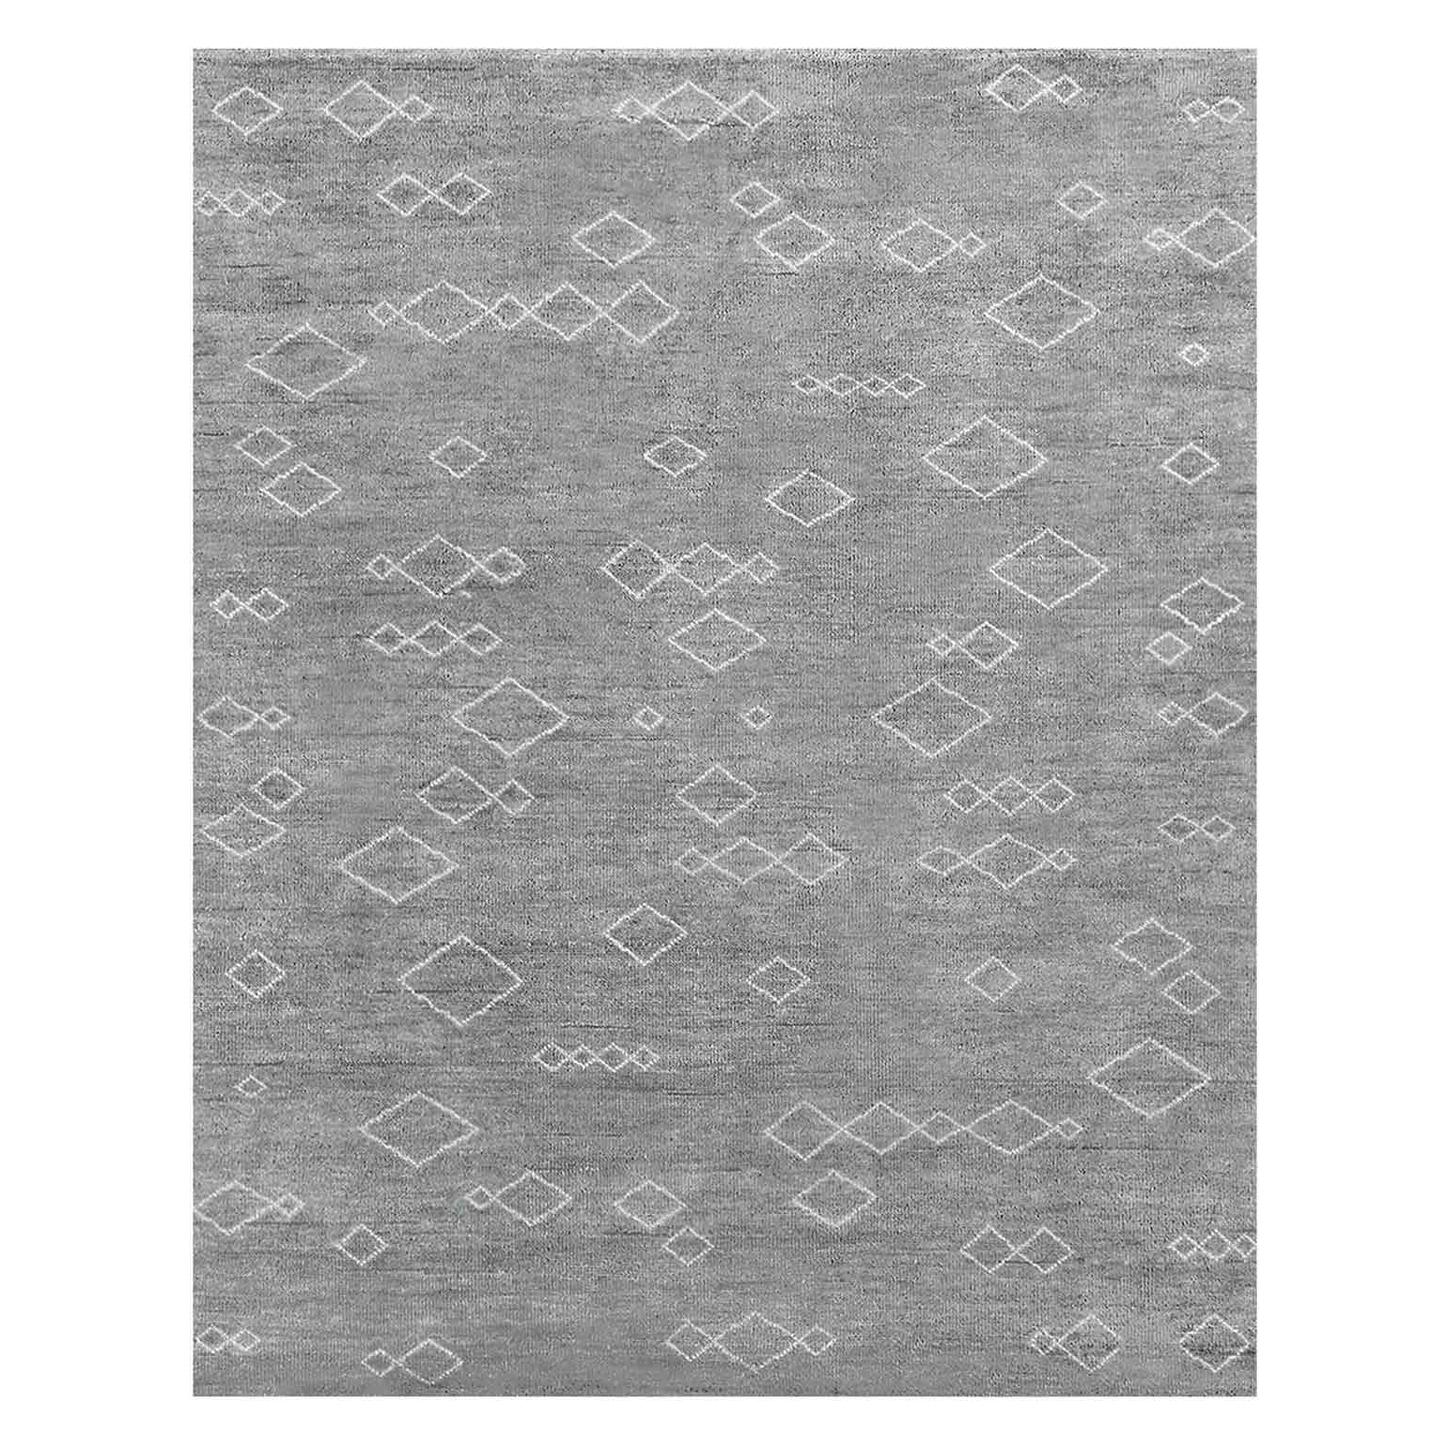 For Sale: Gray (Carbon/Mist) Ben Soleimani Arisa Rug– Moroccan Hand-knotted Plush Wool Carbon/Mist 9'x12'